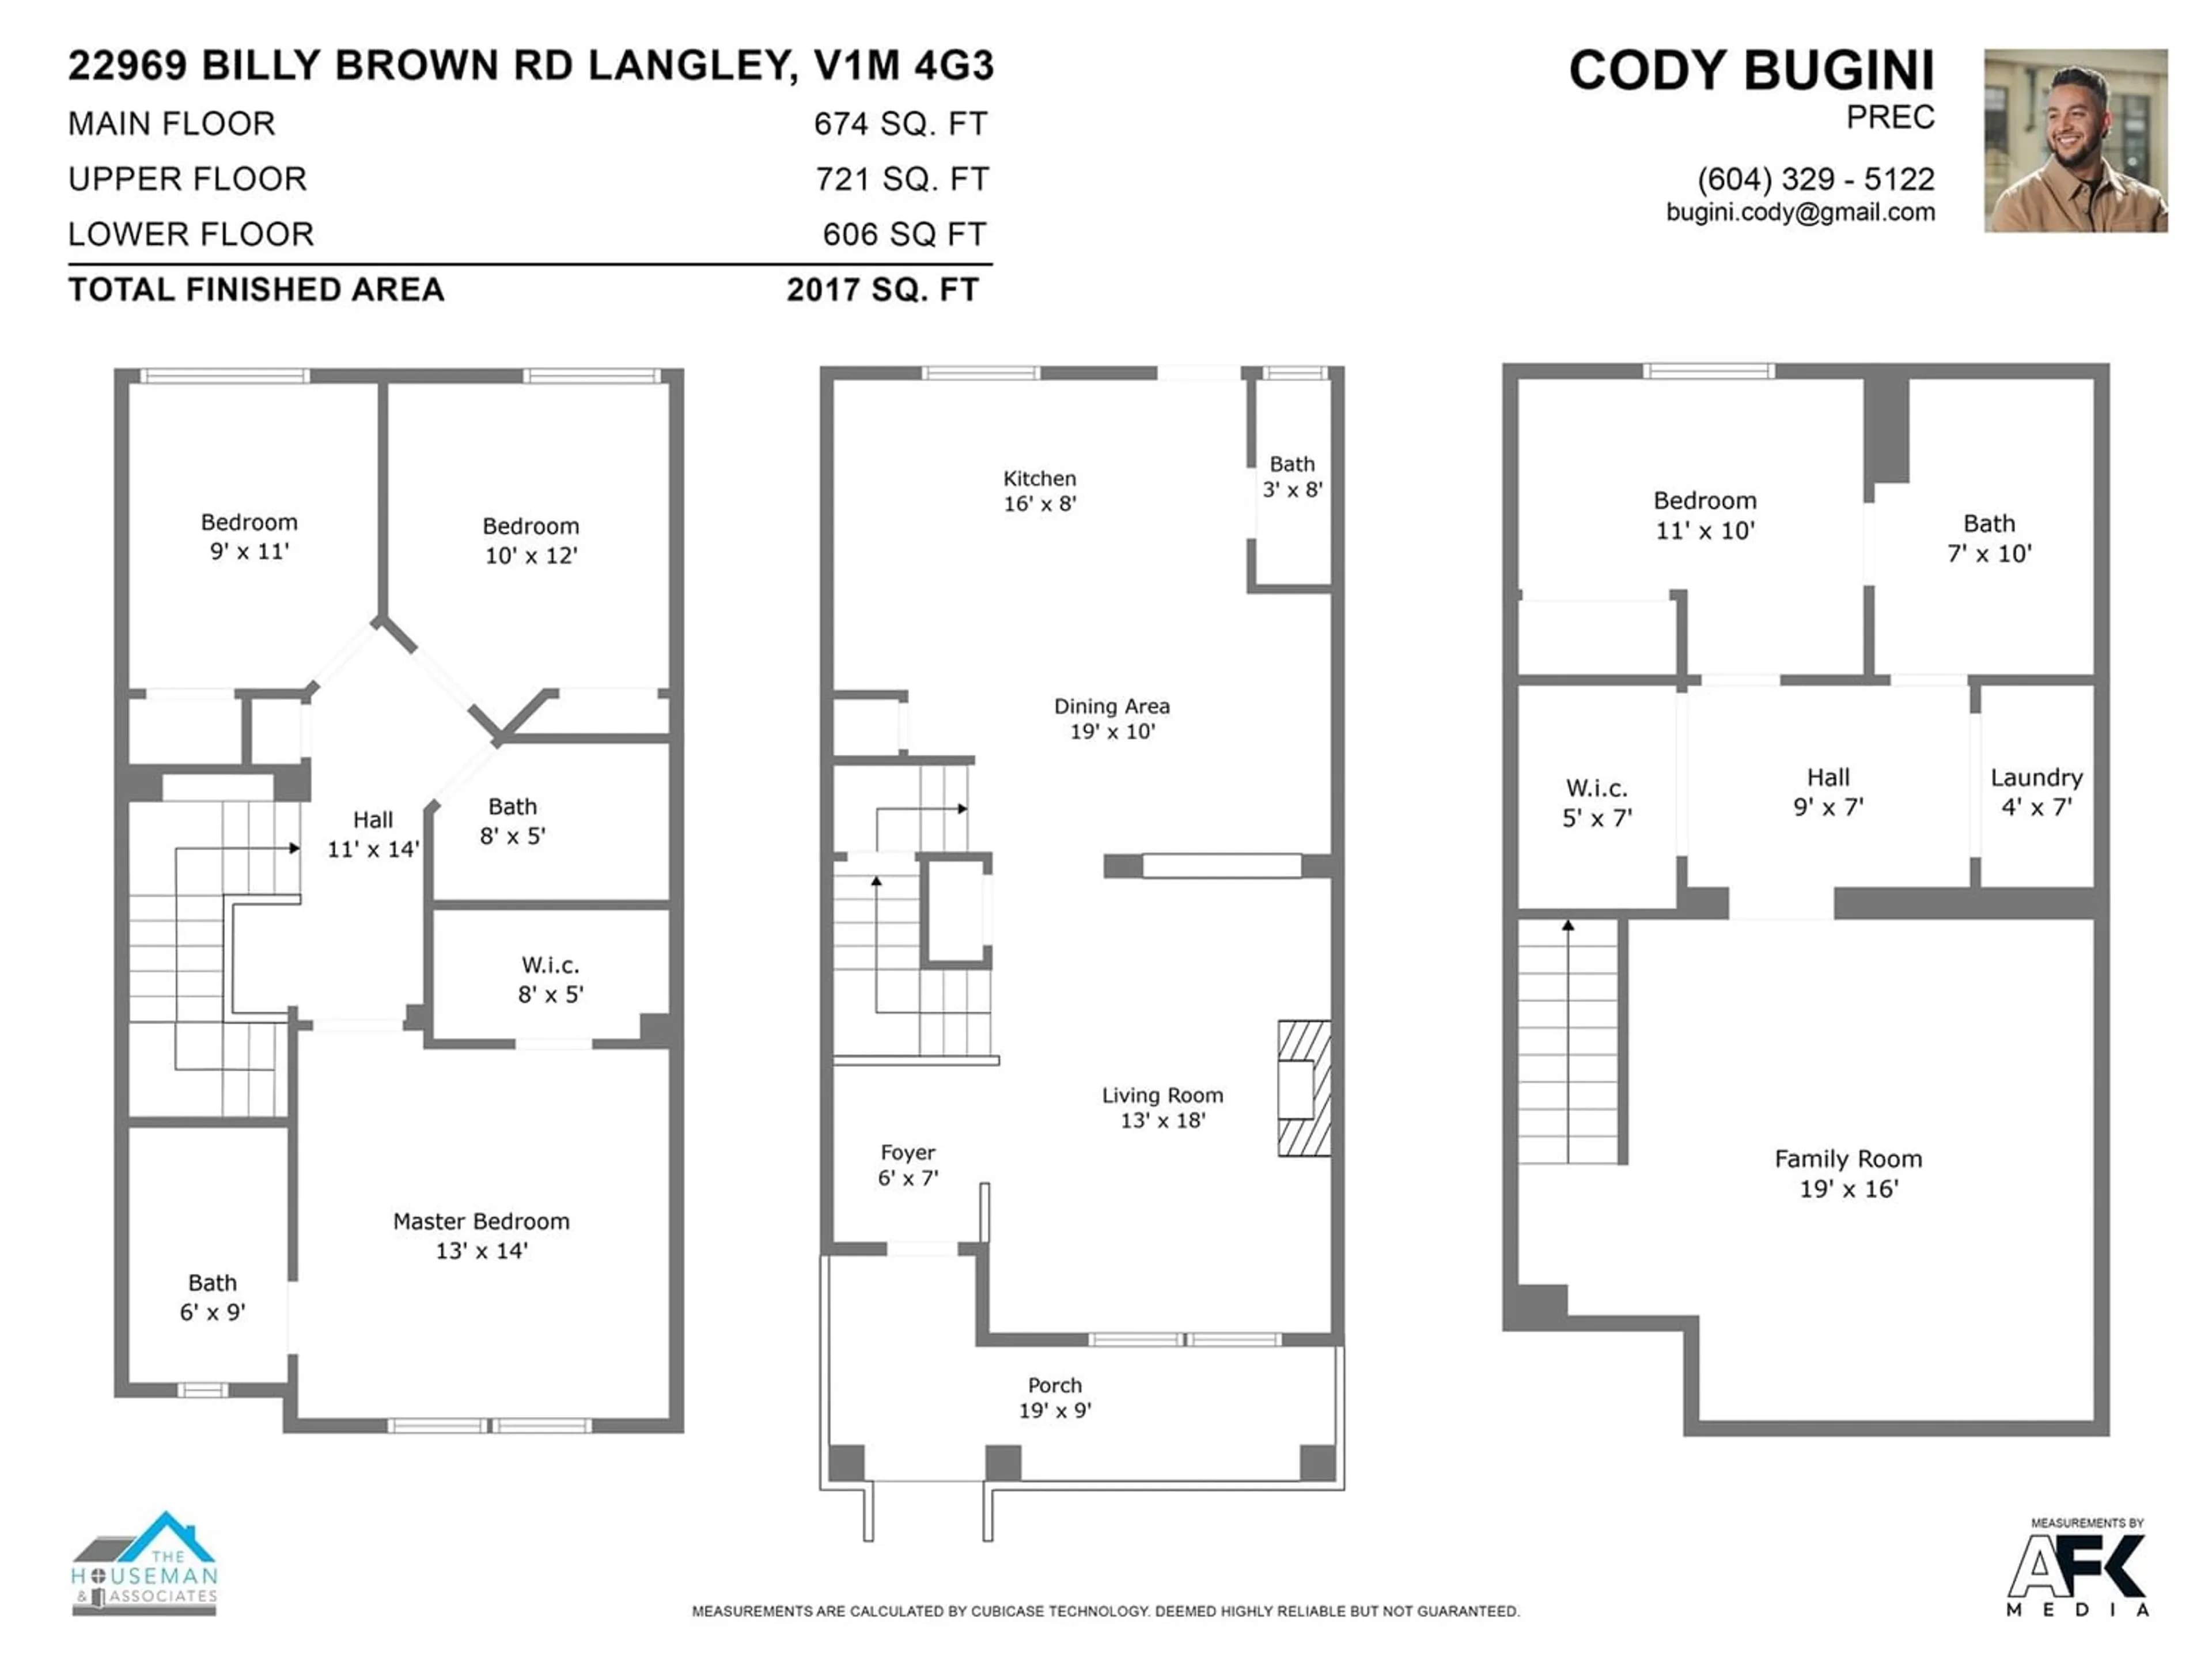 Floor plan for 22969 BILLY BROWN ROAD, Langley British Columbia V1M4G3